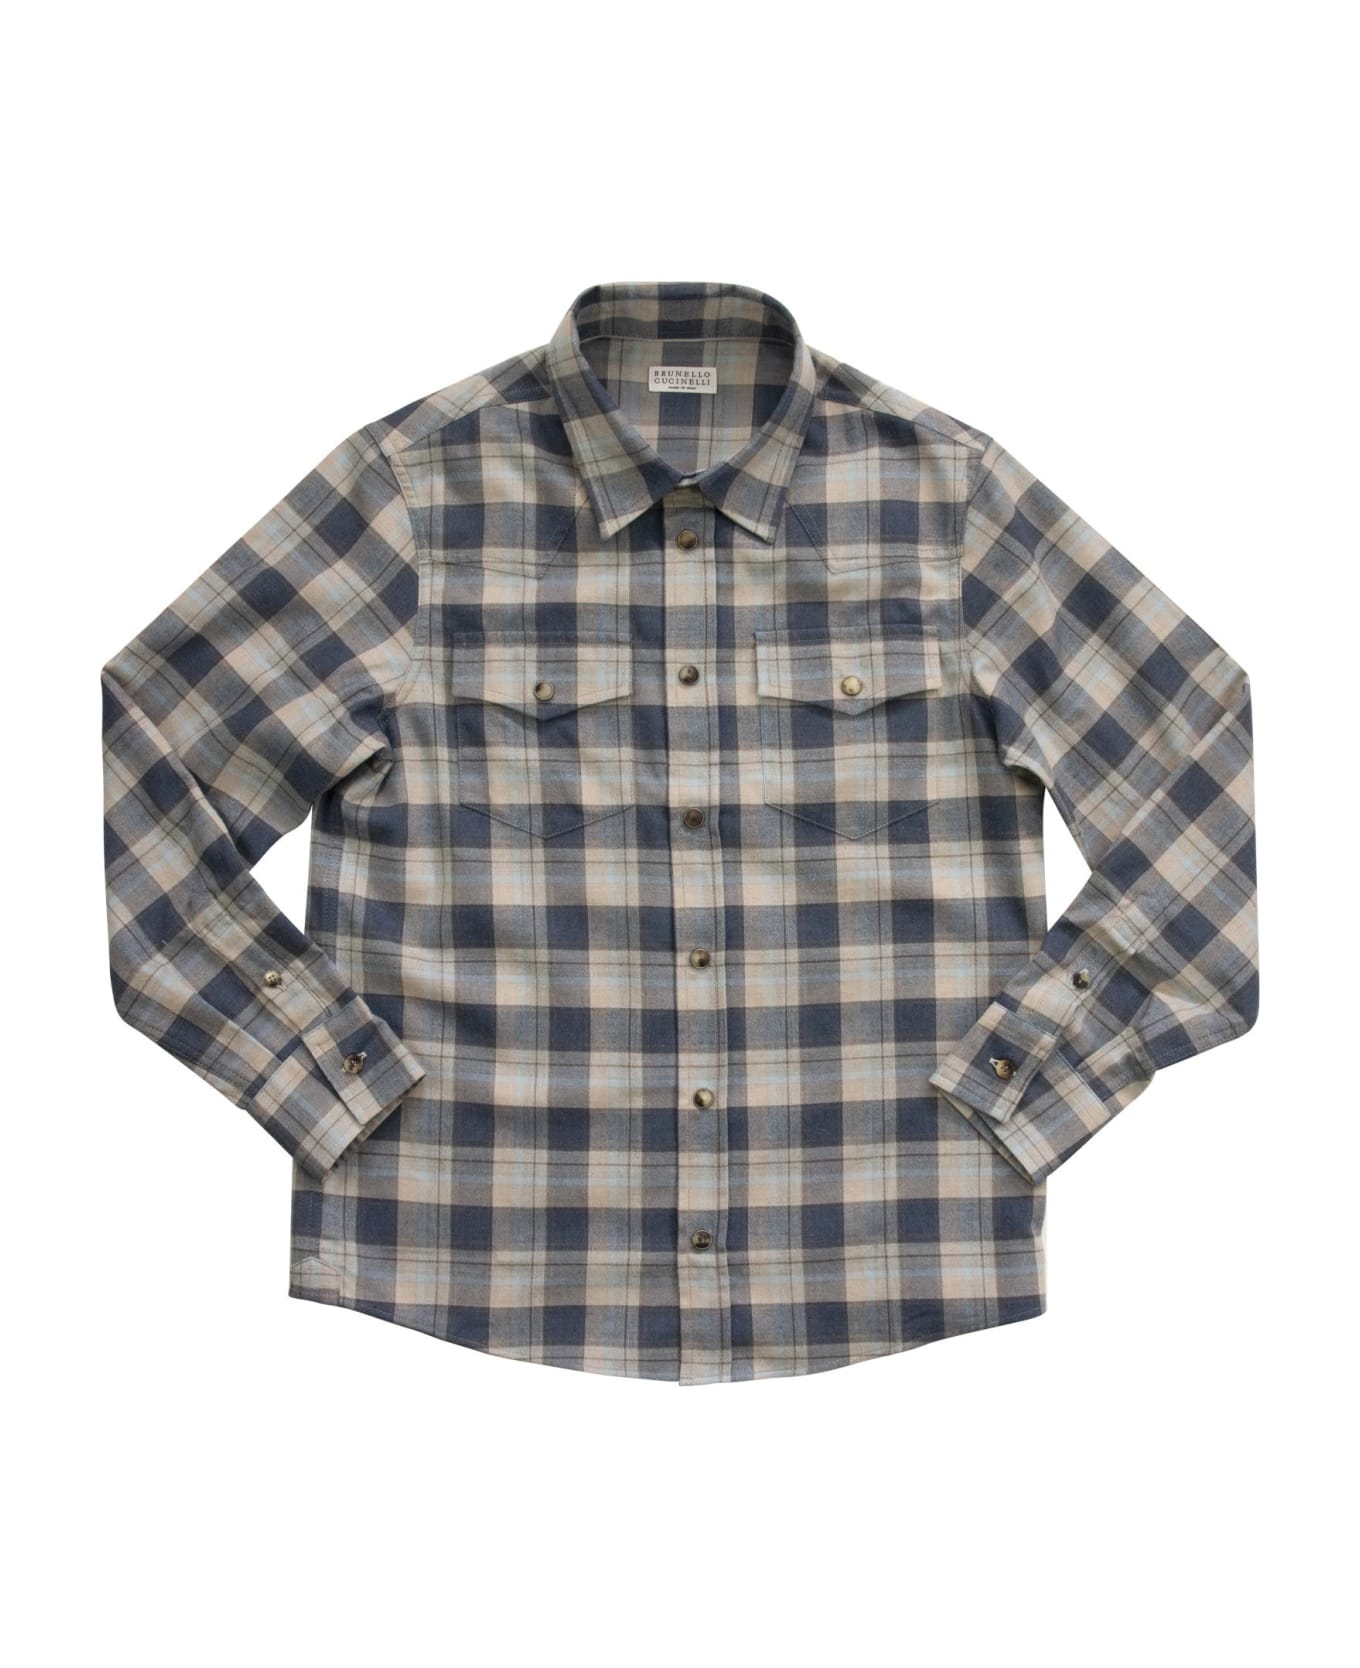 Brunello Cucinelli Madras Flannel Shirt With Snaps And Pockets - Blue